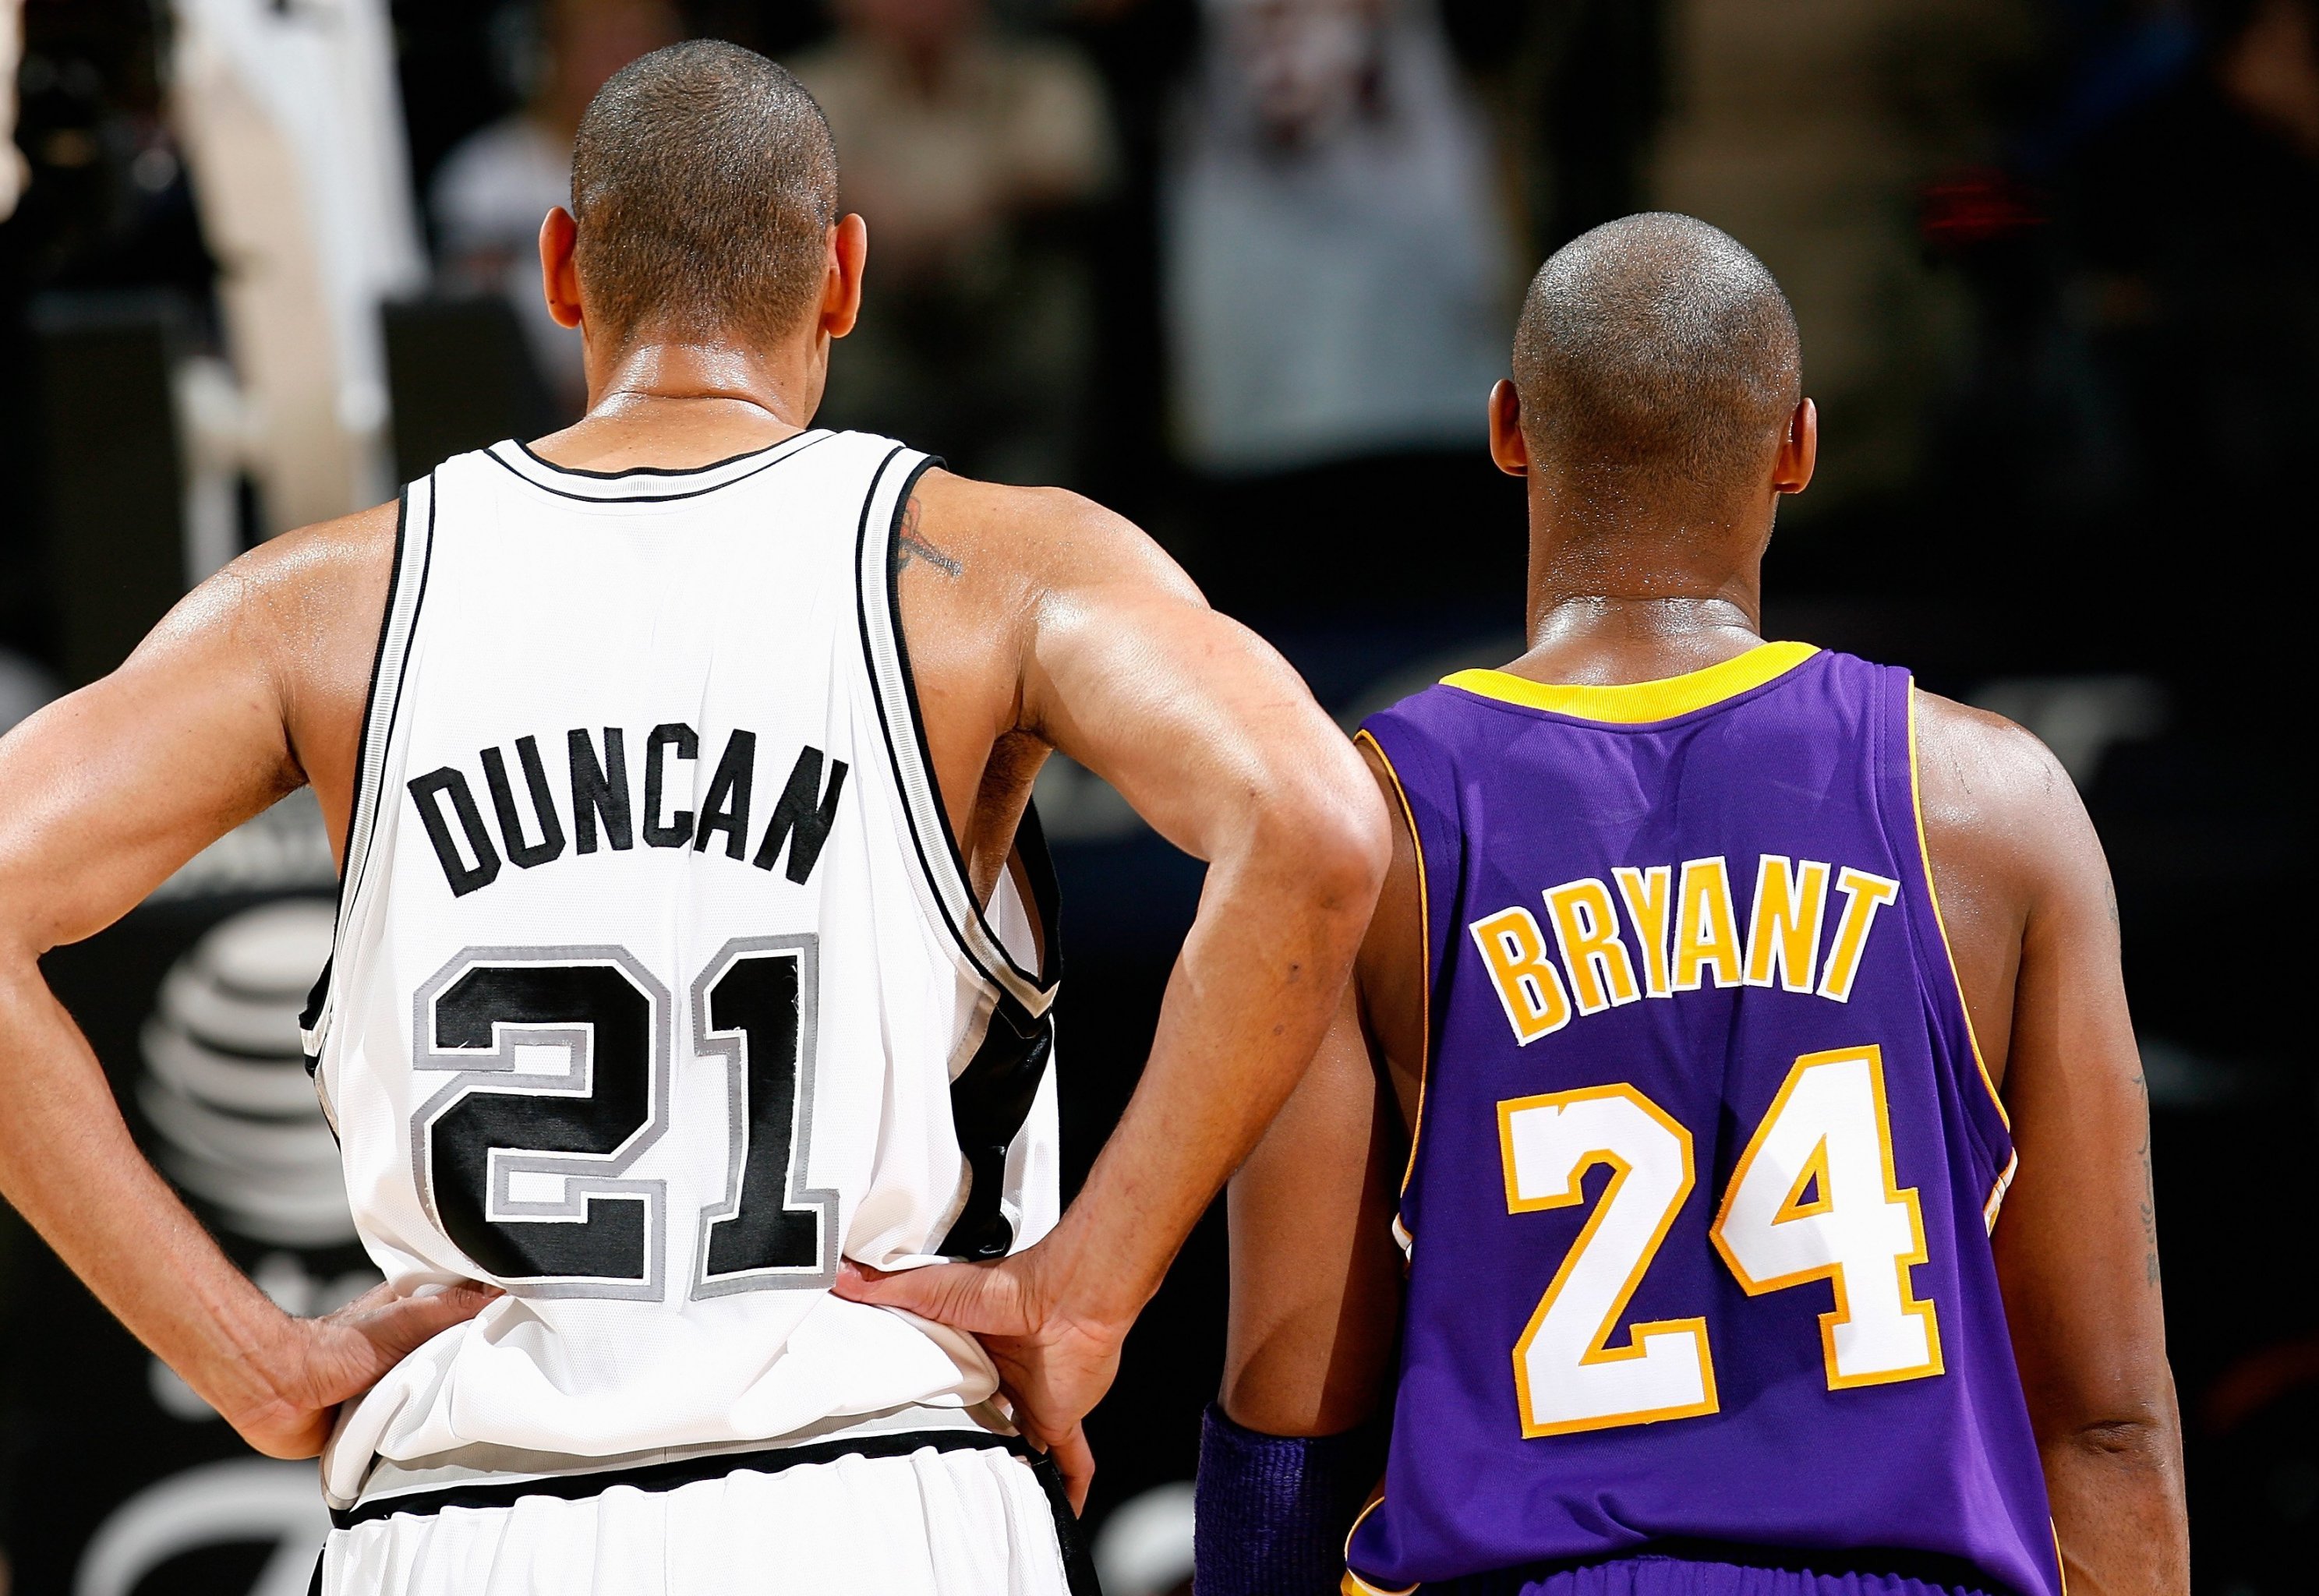 Pro Athletes Who Played for Both Teams in Heated Rivalries